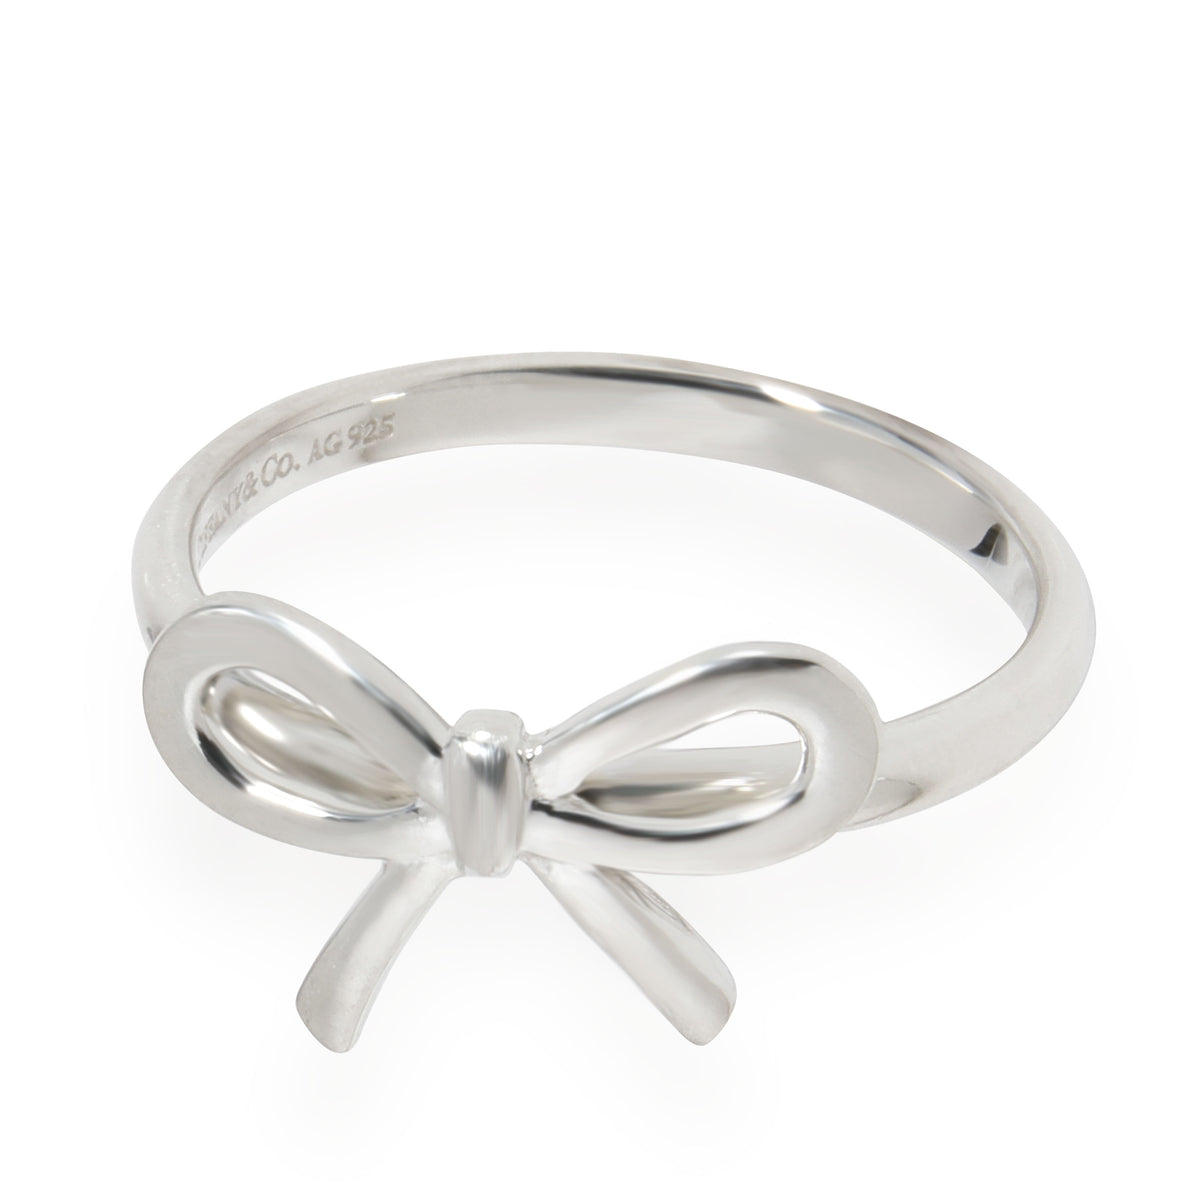 Tiffany & Co. Bow Ring in  Sterling Silver